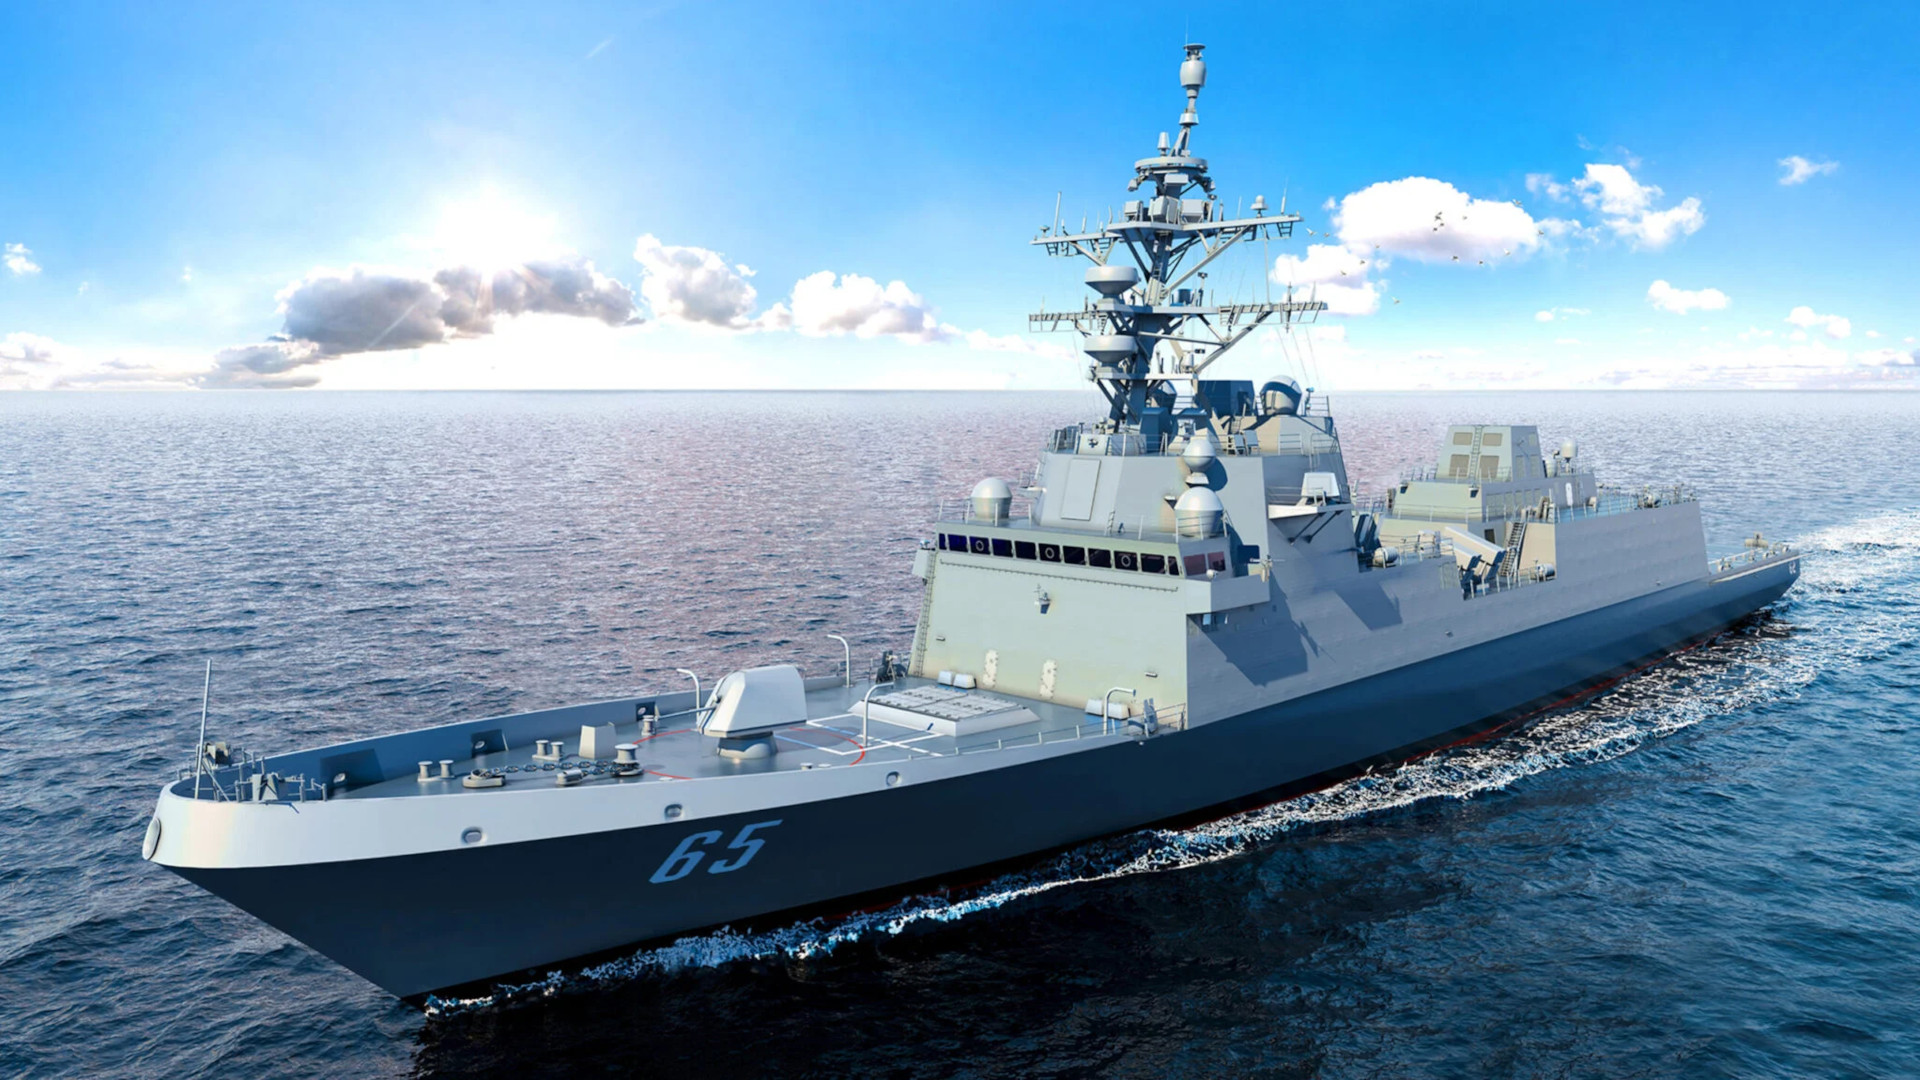 The U.S. Government Accountability Office says that "unplanned weight growth" and design instability have been major factors in the huge delays with the Constellation class, and that the ship's top speed could take a hit as a result.